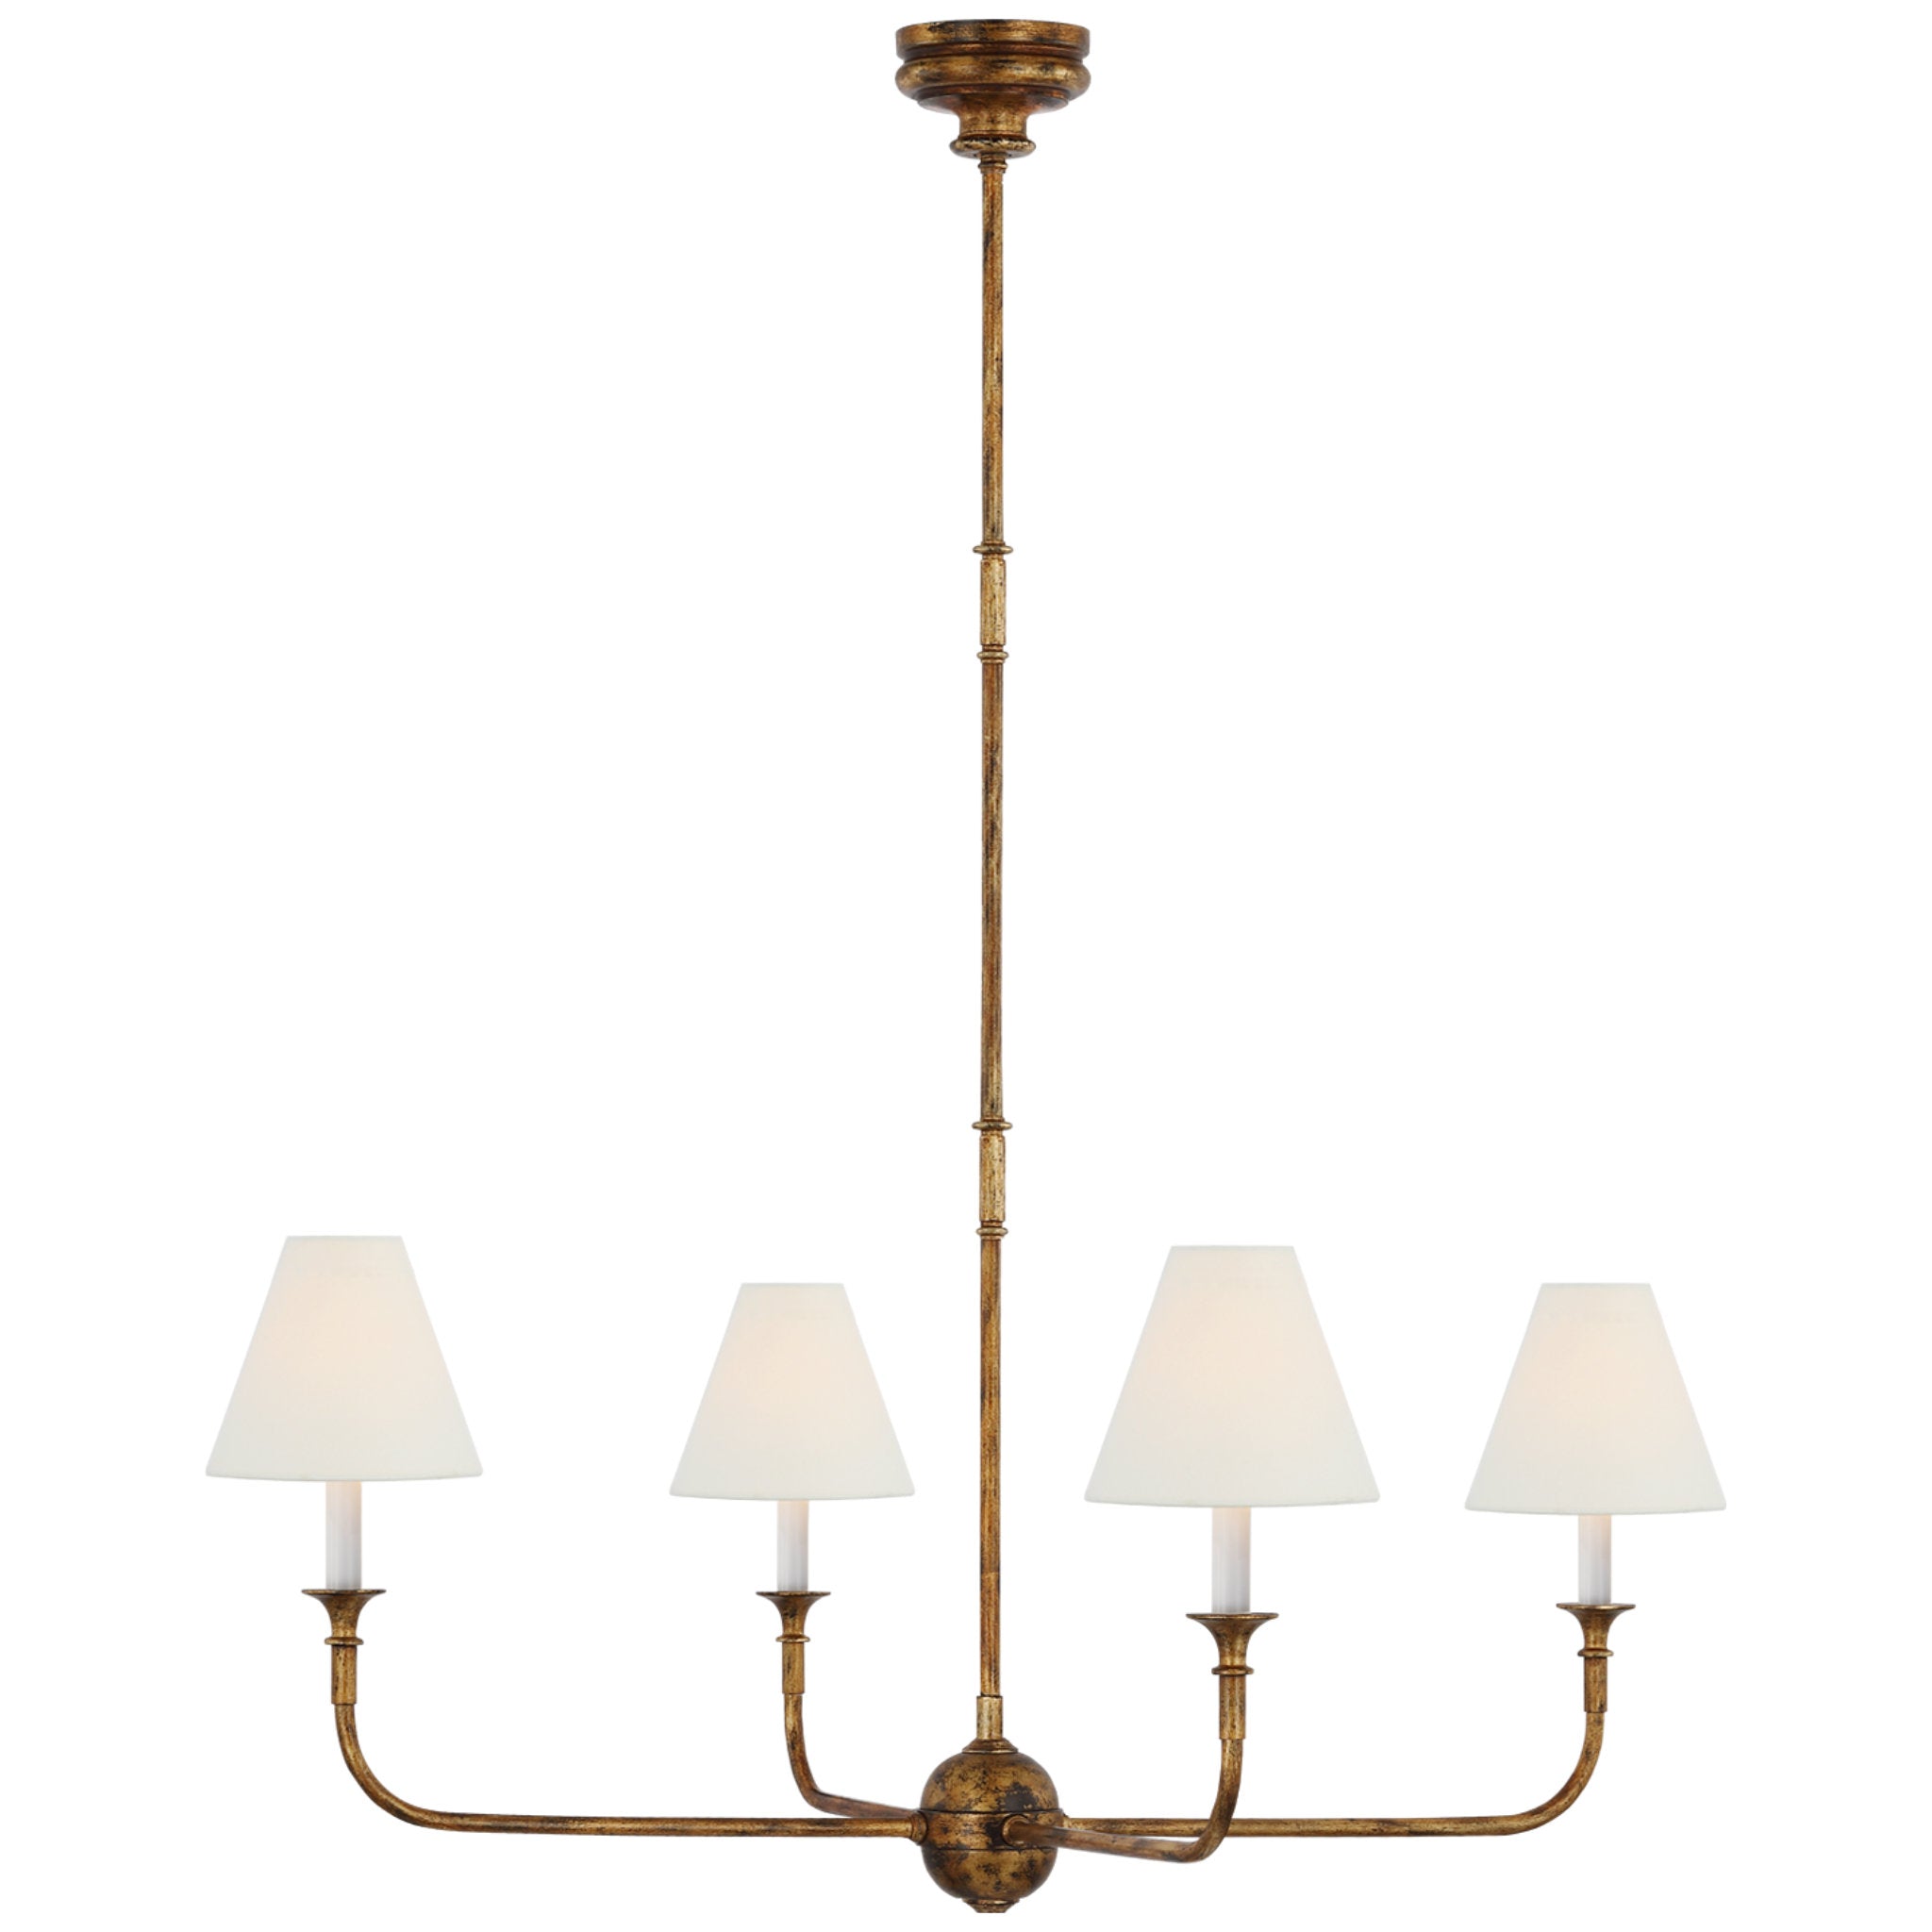 TOB5014HABAW by Visual Comfort - Goodman Large Hanging Lamp in Hand-Rubbed  Antique Brass with Antique White Shade